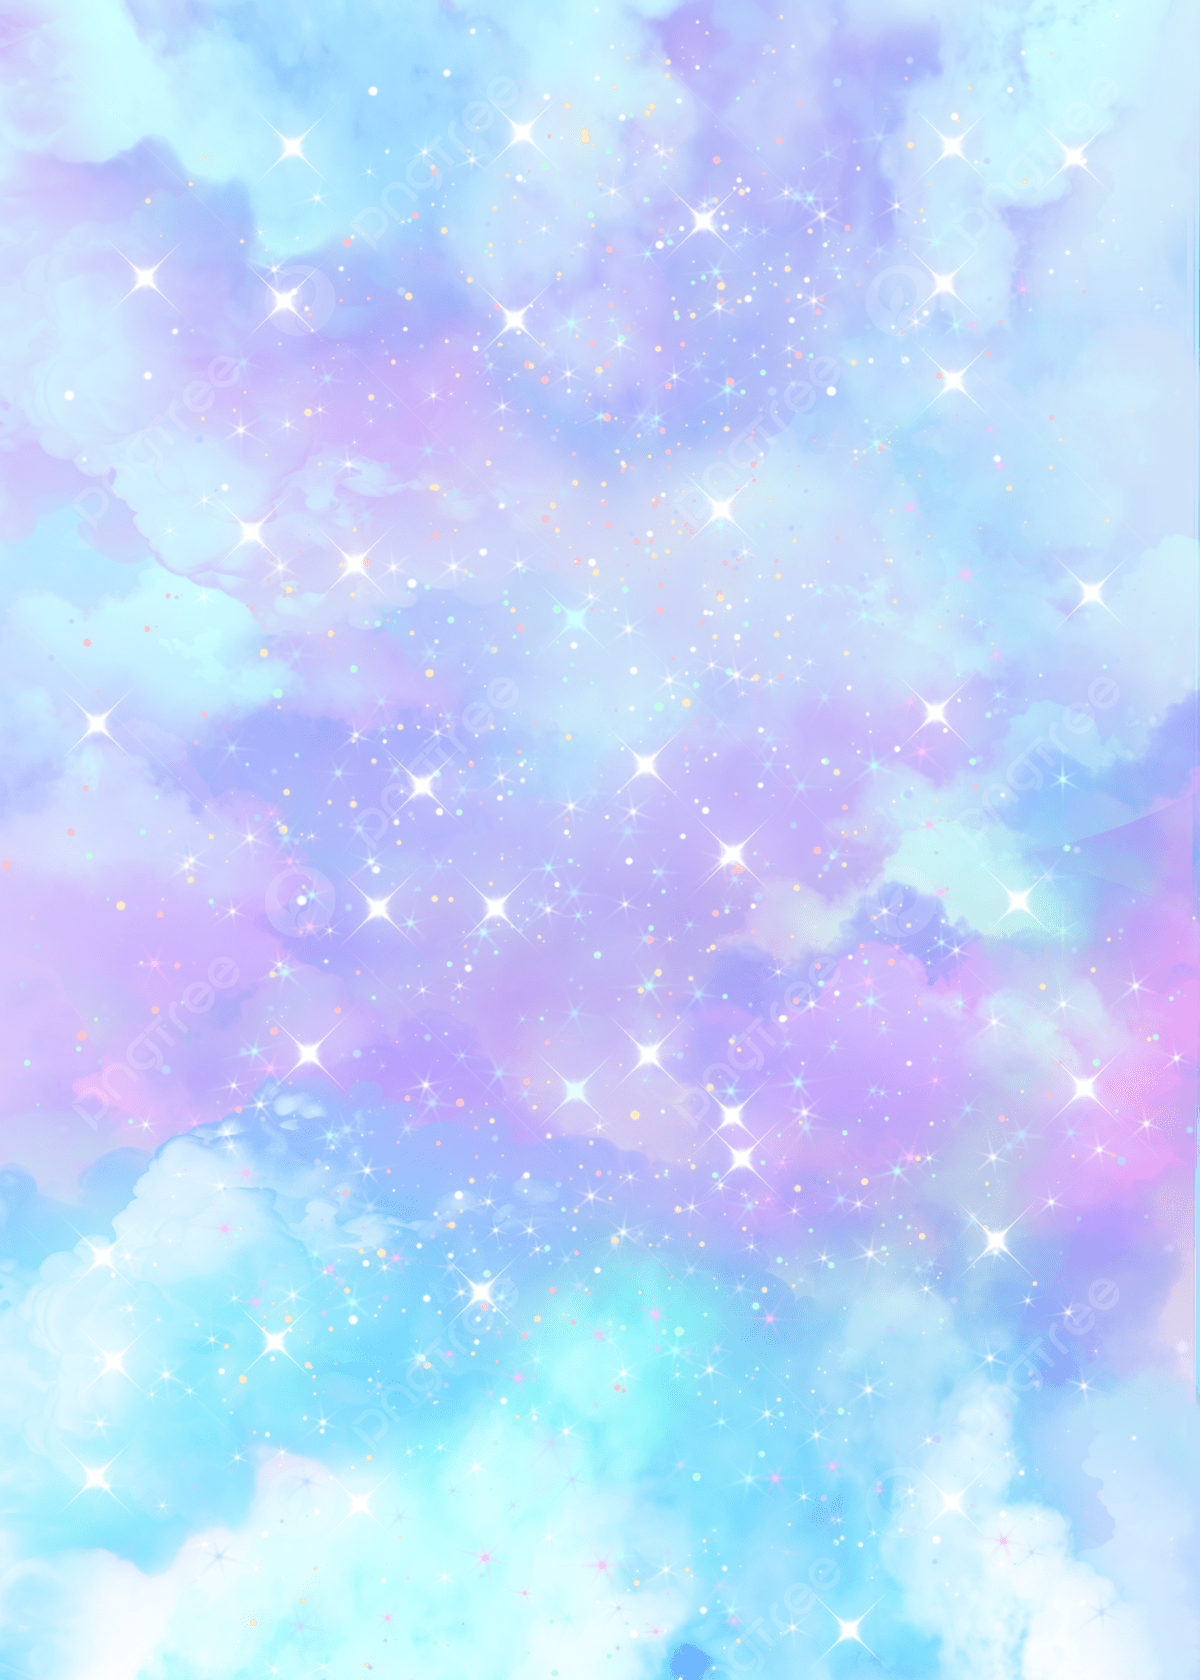 Blue Holographic Universe Cloud Colorful Background Wallpaper Image For Free Download